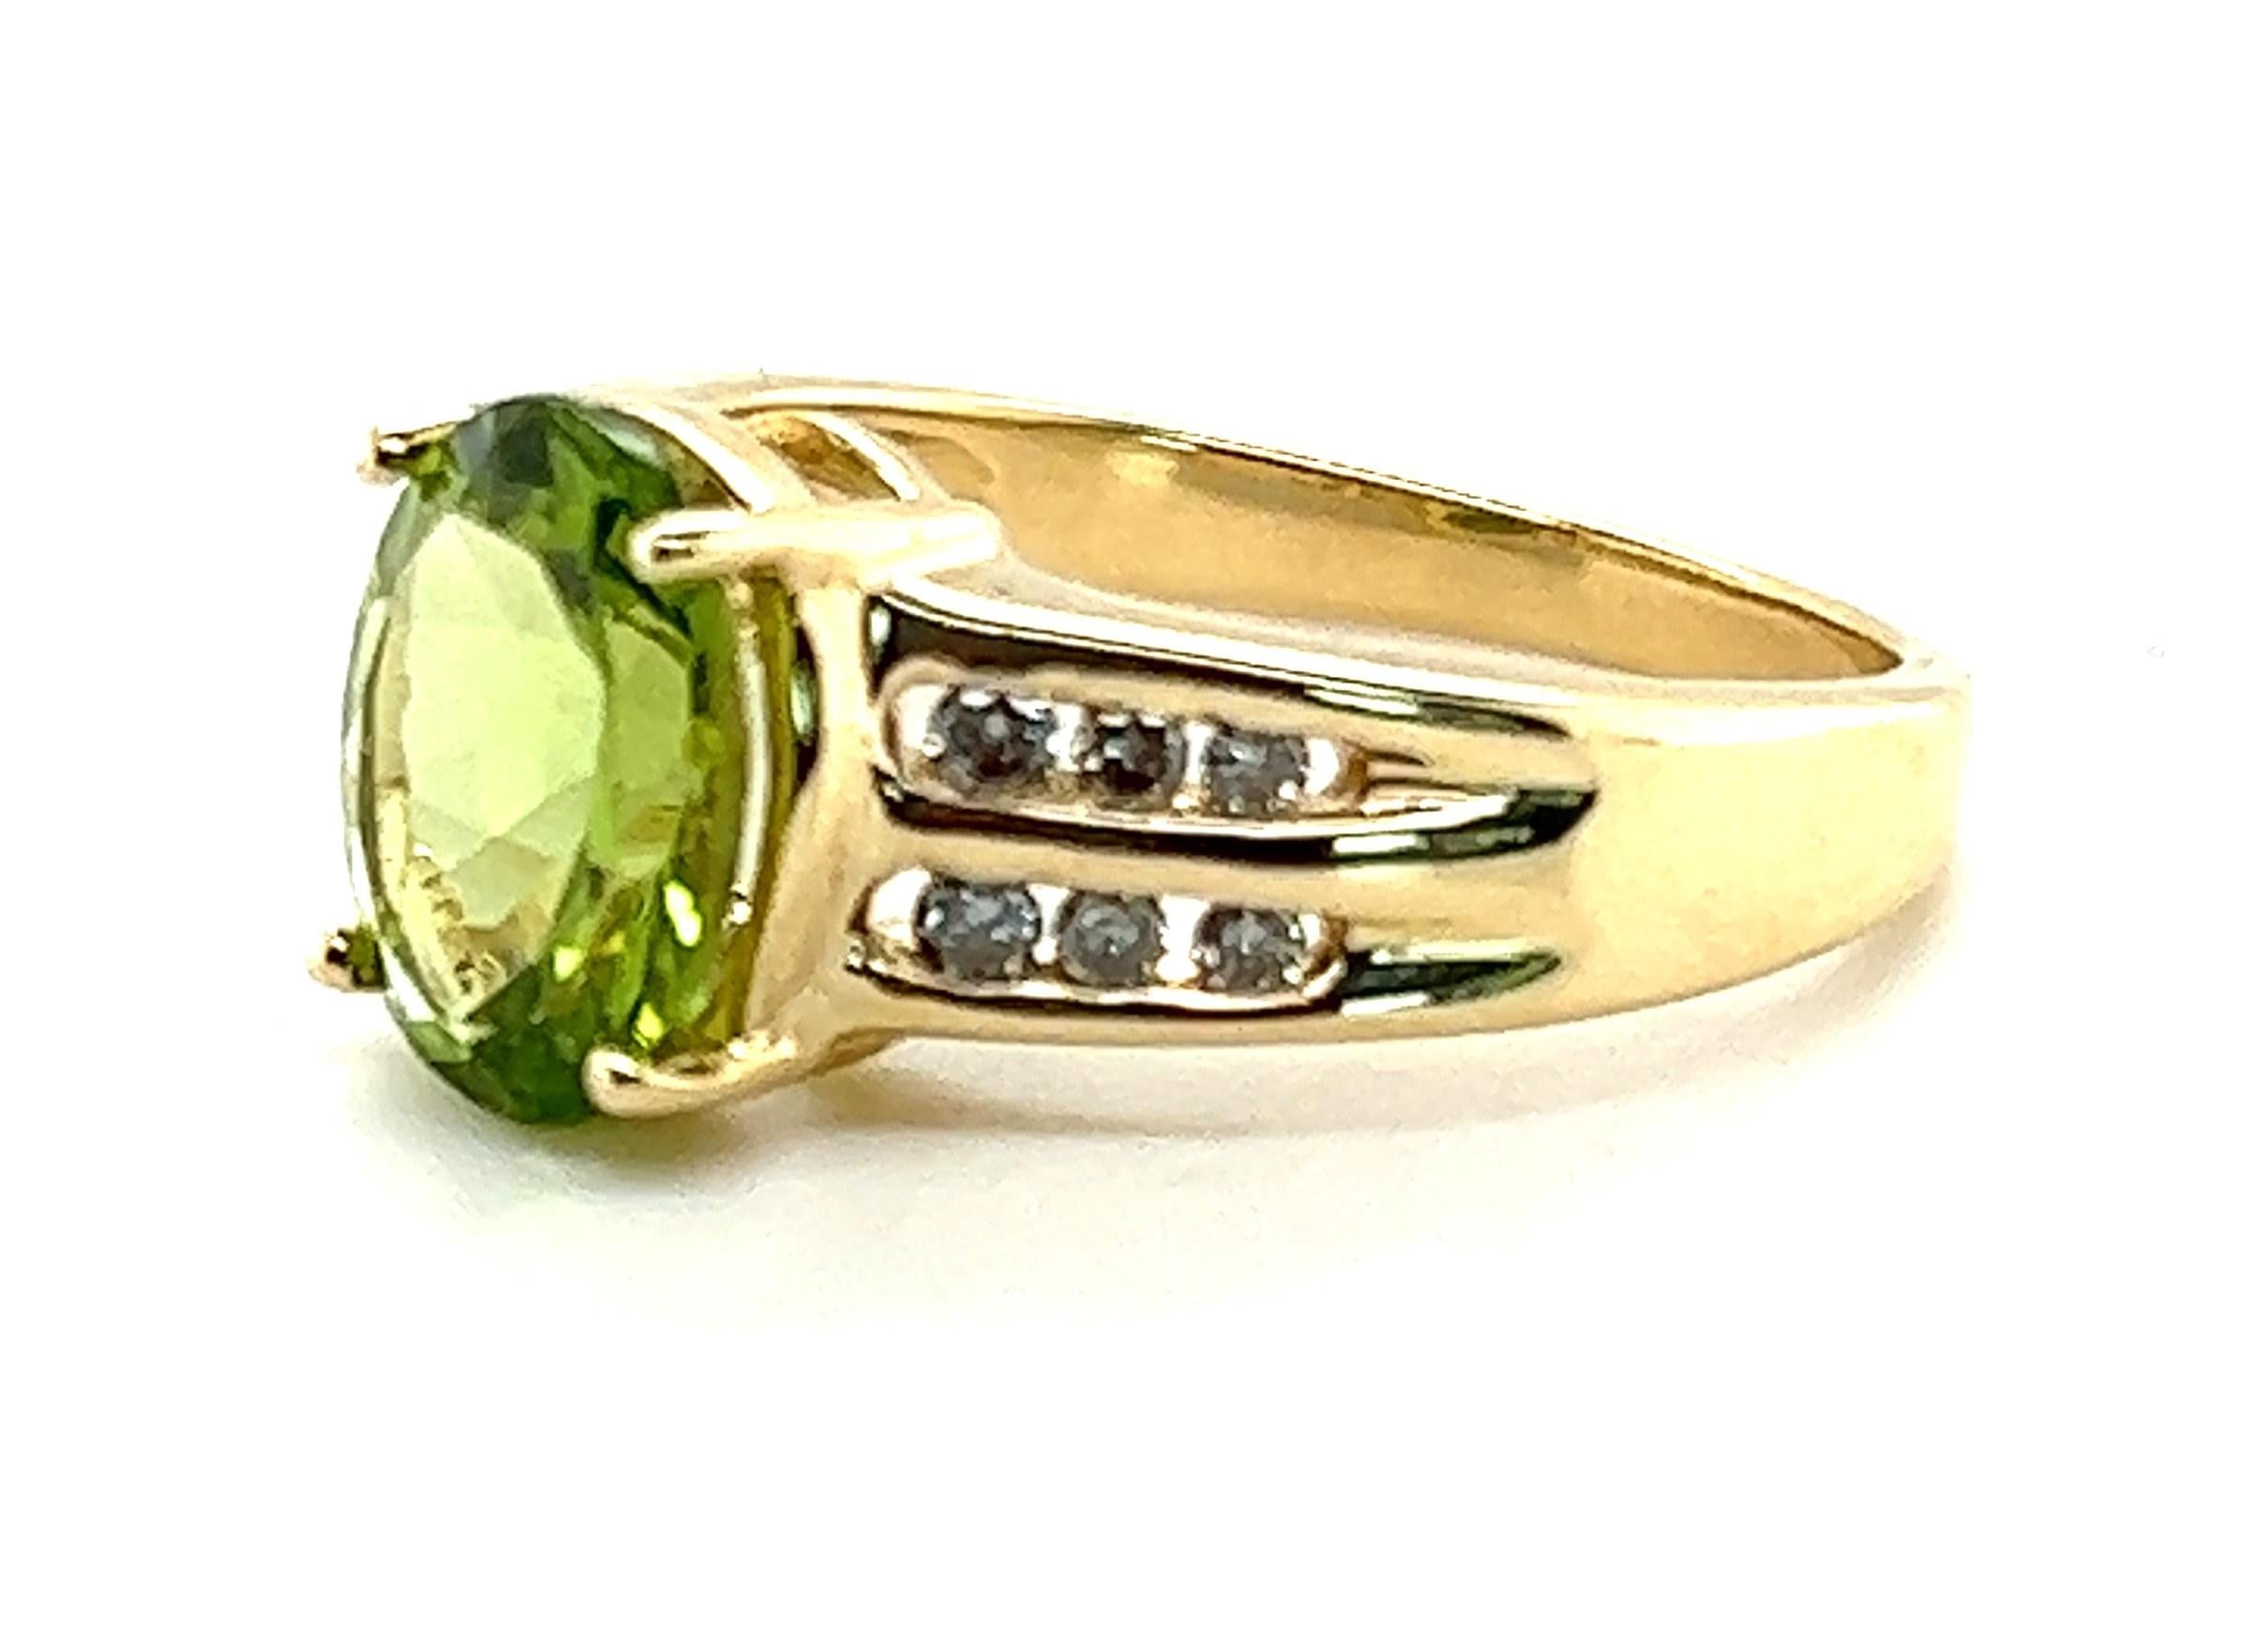 What do you get an August Baby? This peridot ring, of course!

This ring has an exceptional color peridot that's cut for maximum sparkle. The peridot weighs approximately 2.44 carats. The side of the ring contains channel set diamonds weighing